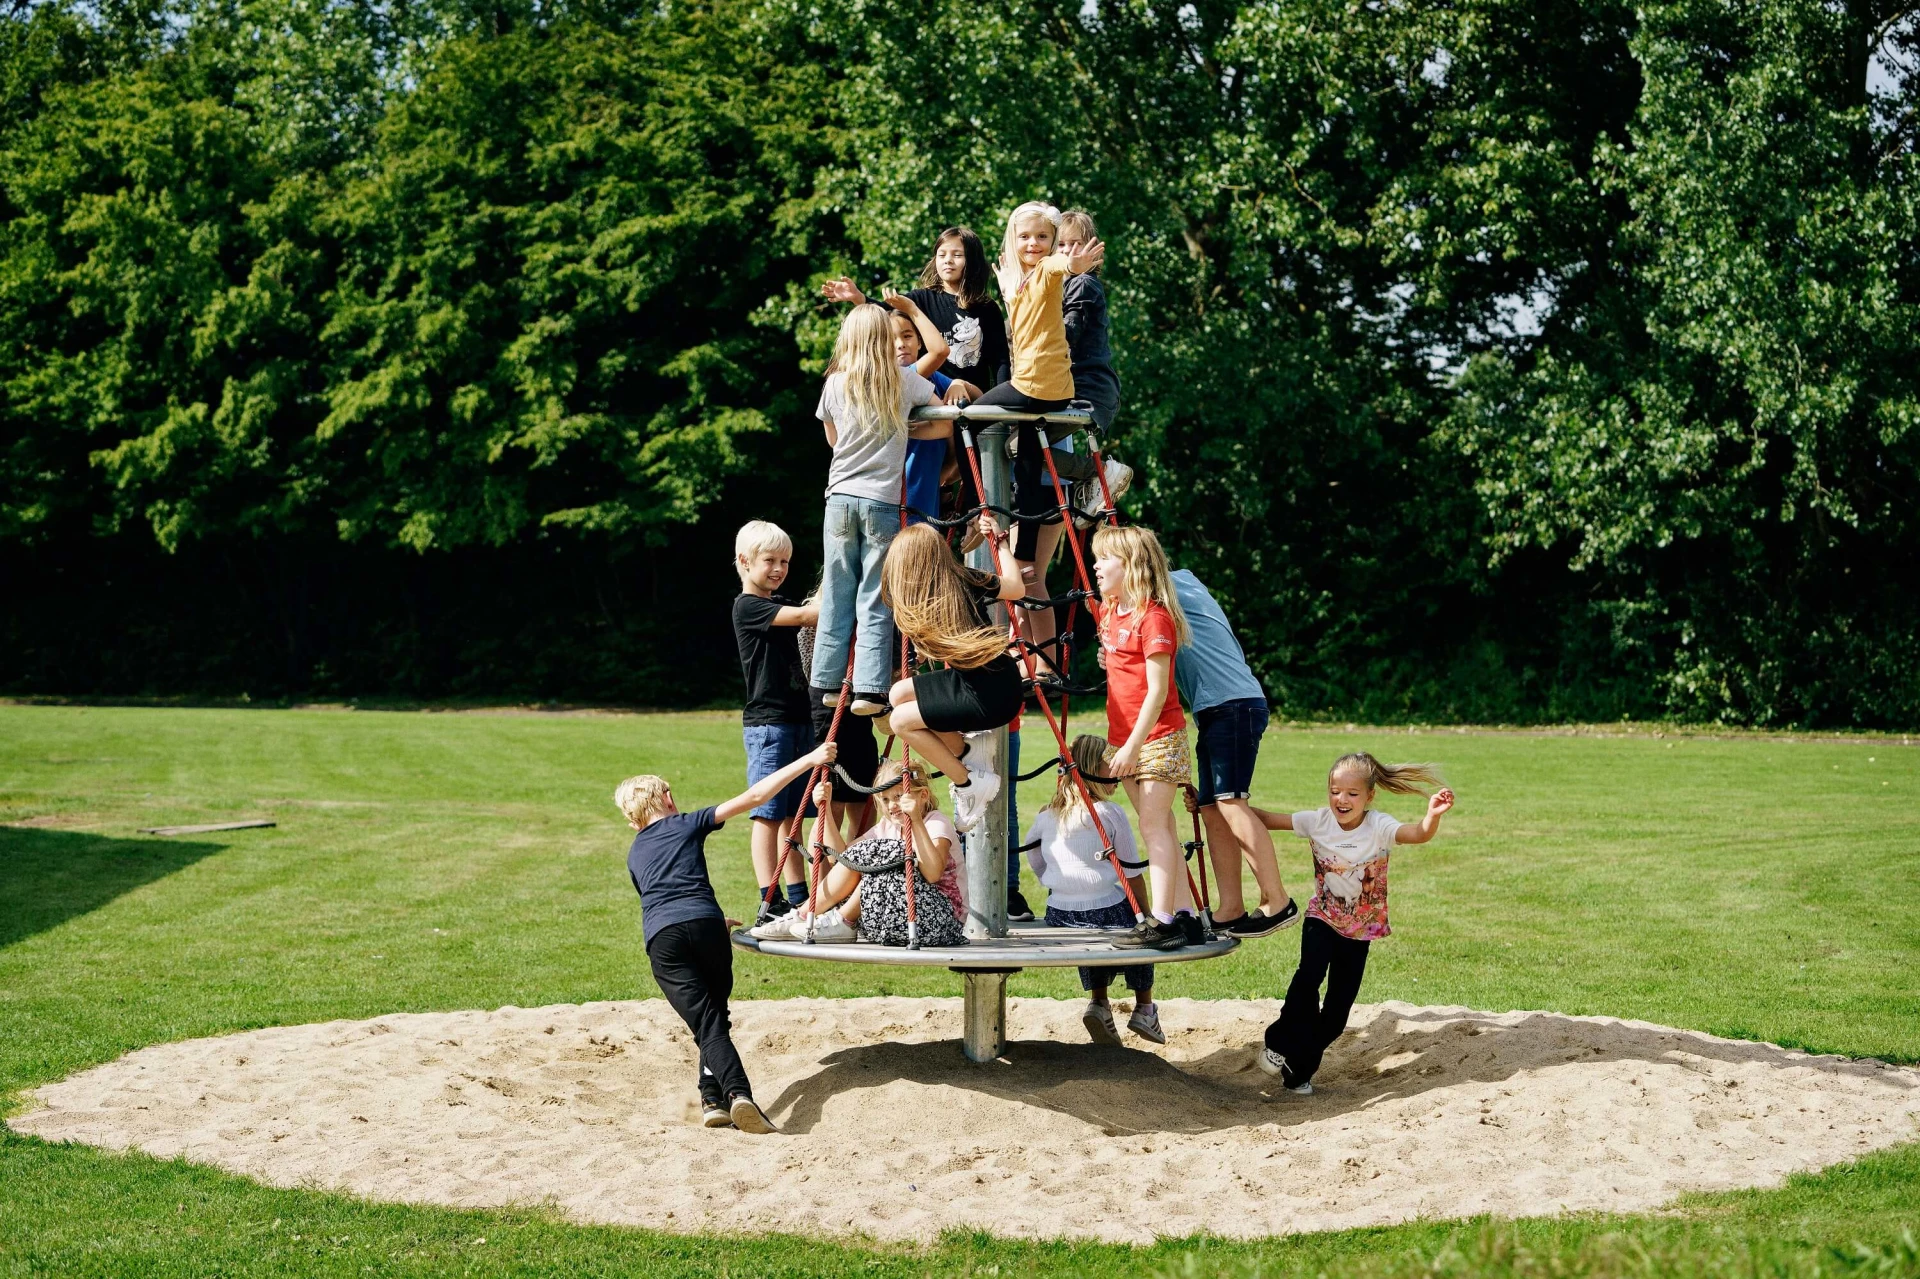 A group of children climbing and spinning on a Twisting Net